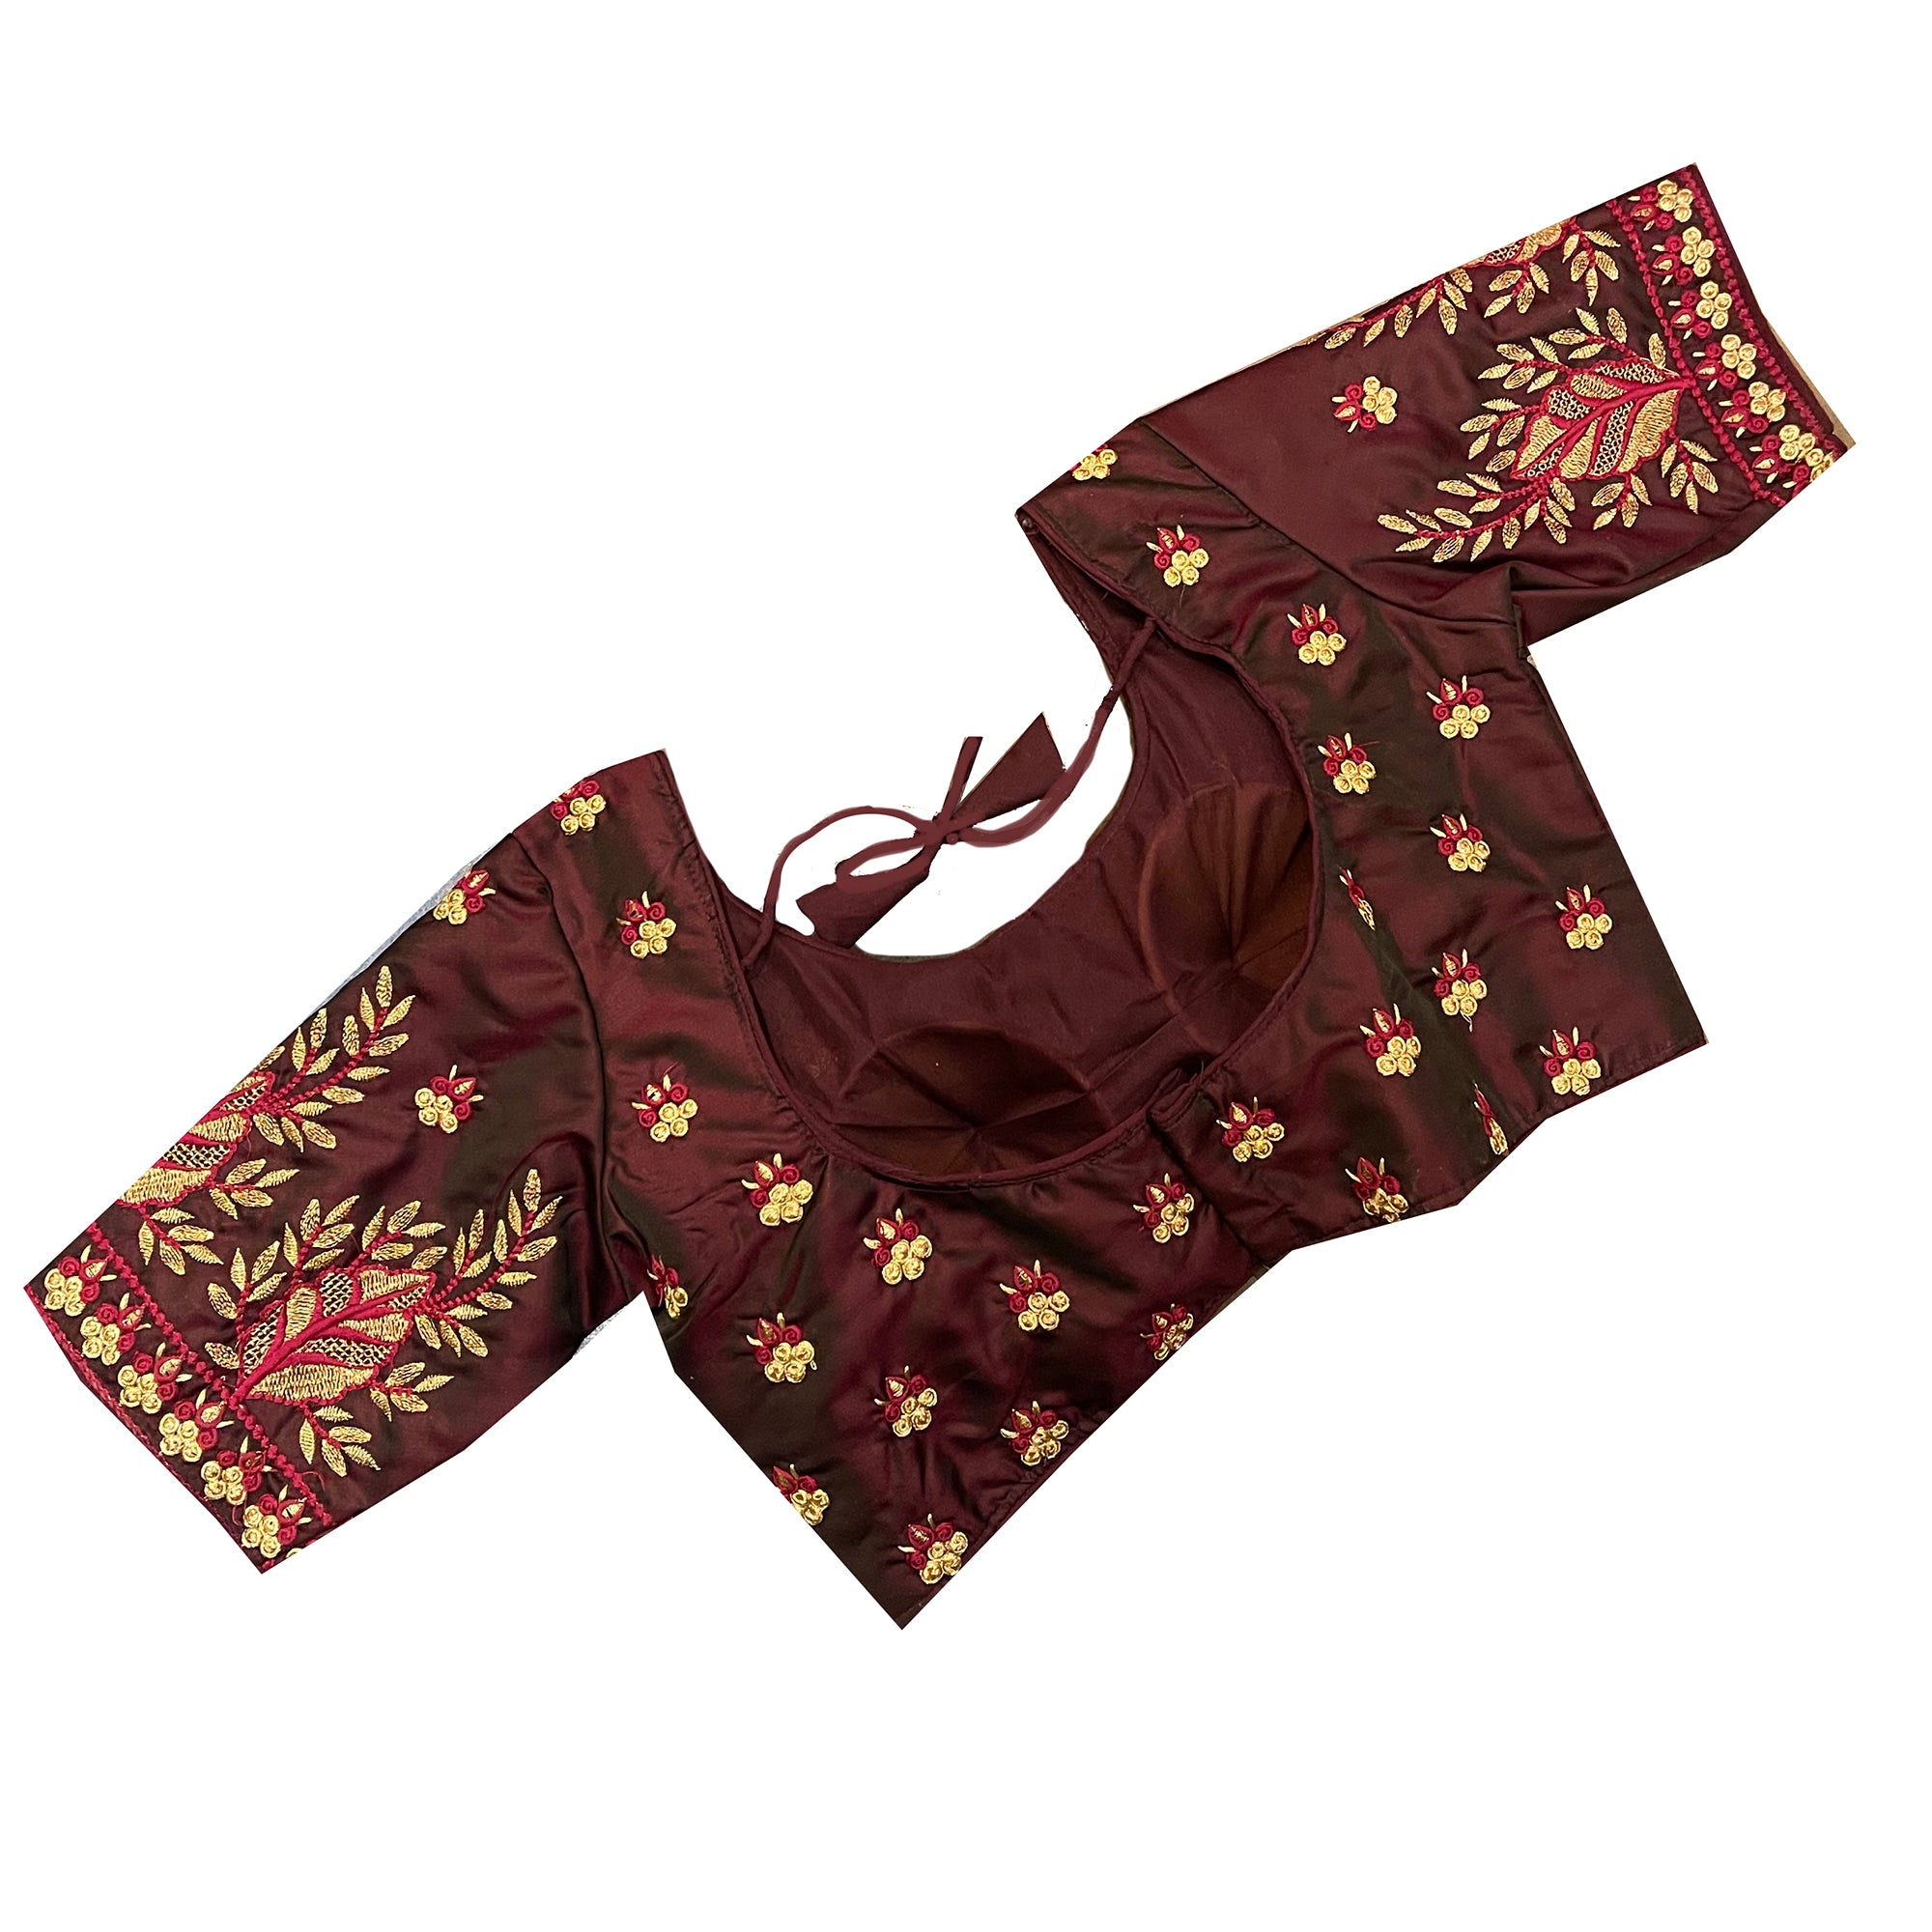 Embroidered Maroon Blouse - Vintage India NYC